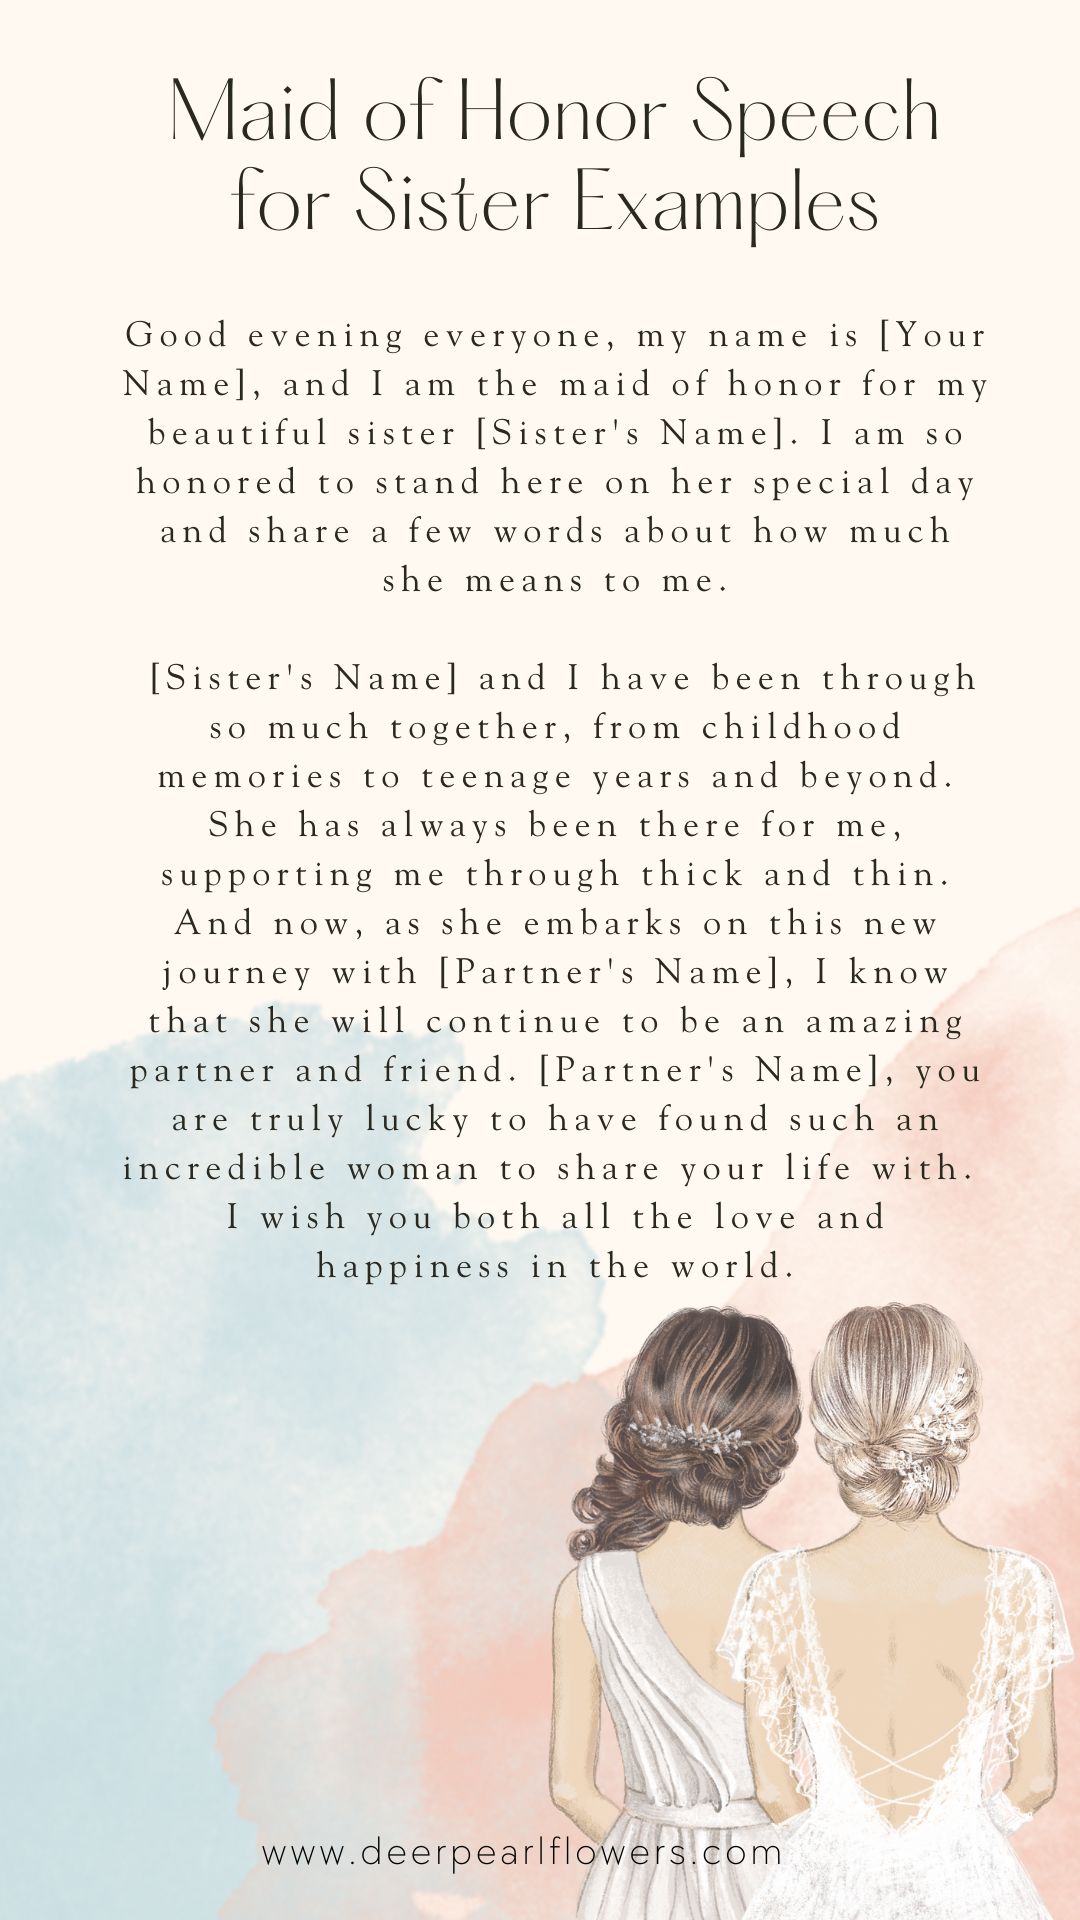 example maid of honor speech for sister